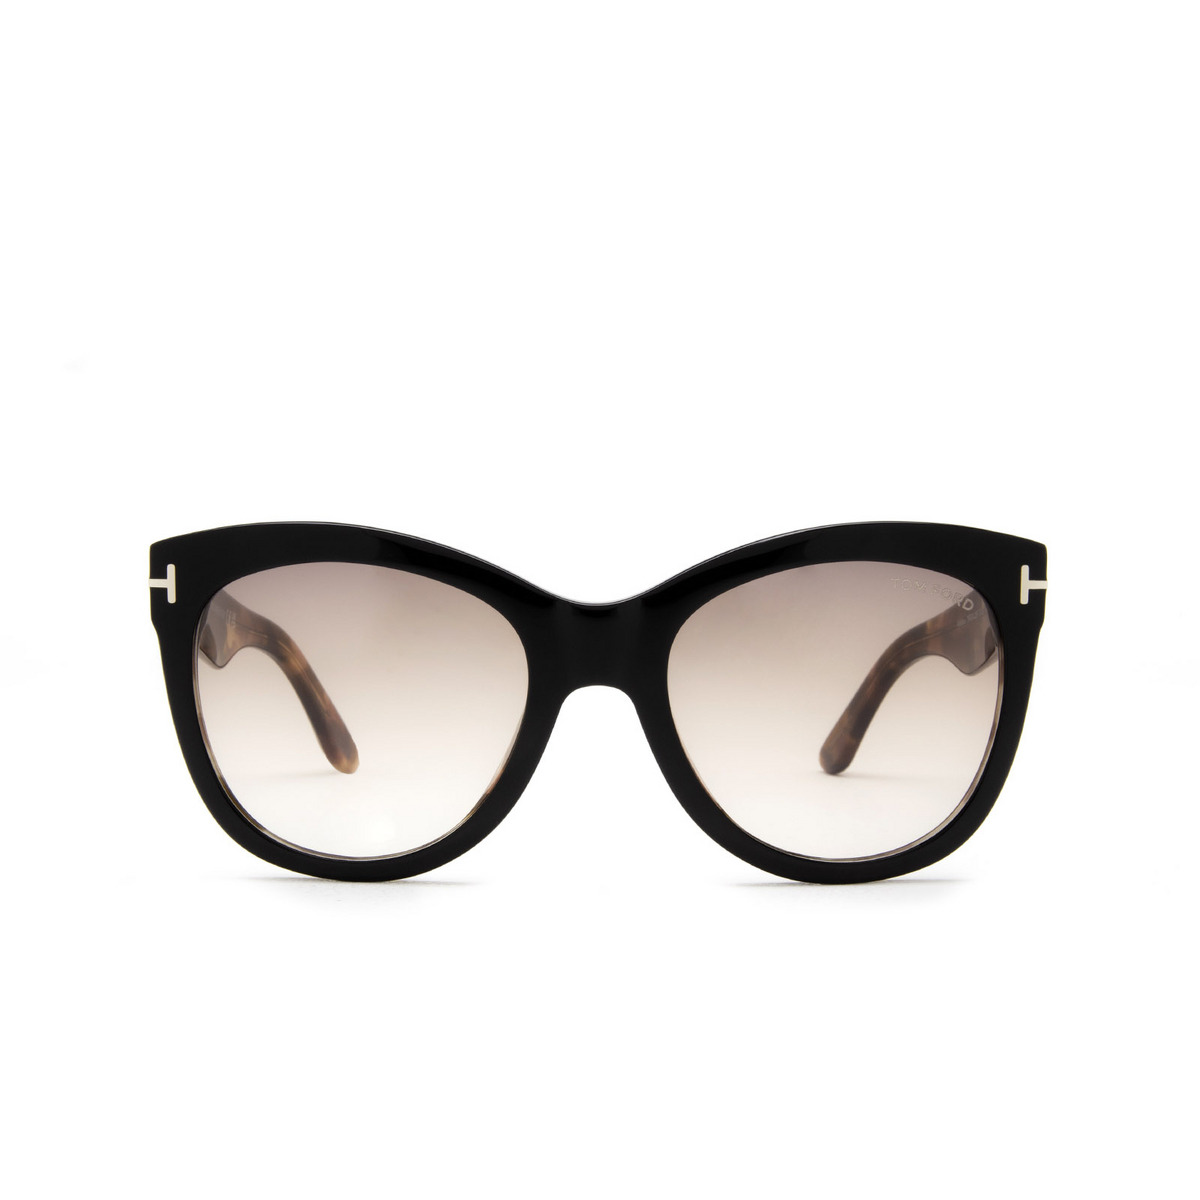 Tom Ford® Cat-eye Sunglasses: Wallace FT0870 color Black & Havana 05F - front view.